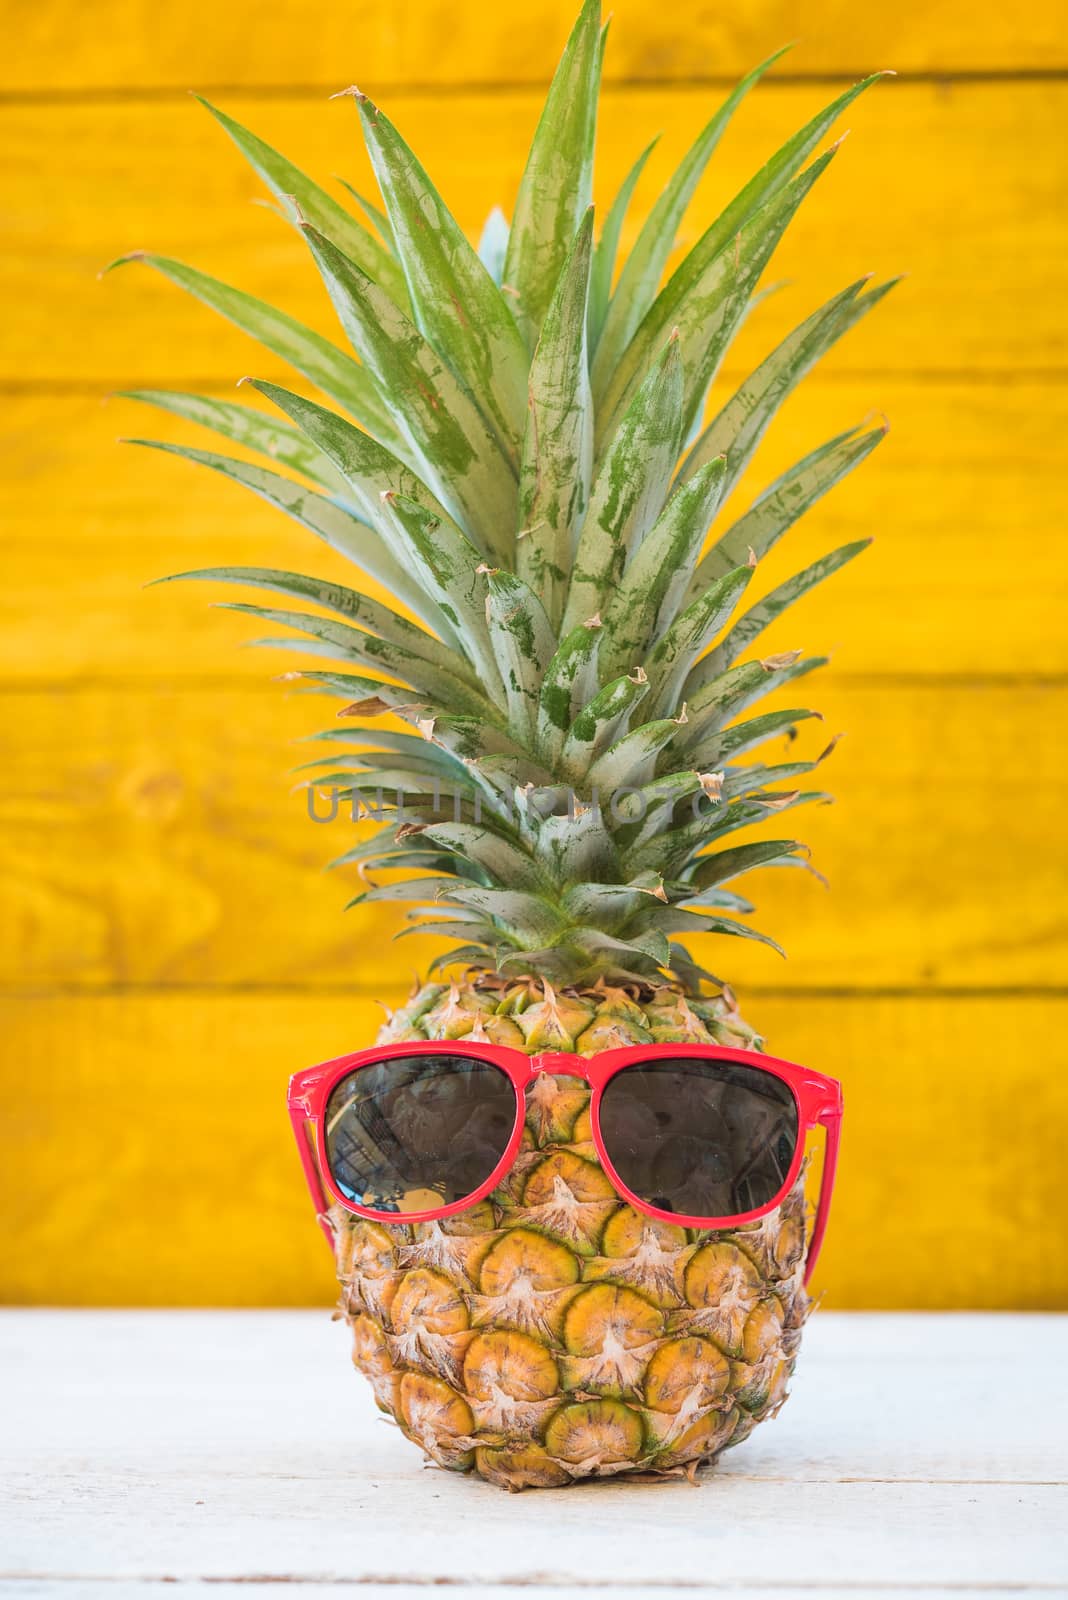 Holiday pineapple have sunglasses on yellow wooden background, tropical holiday concept